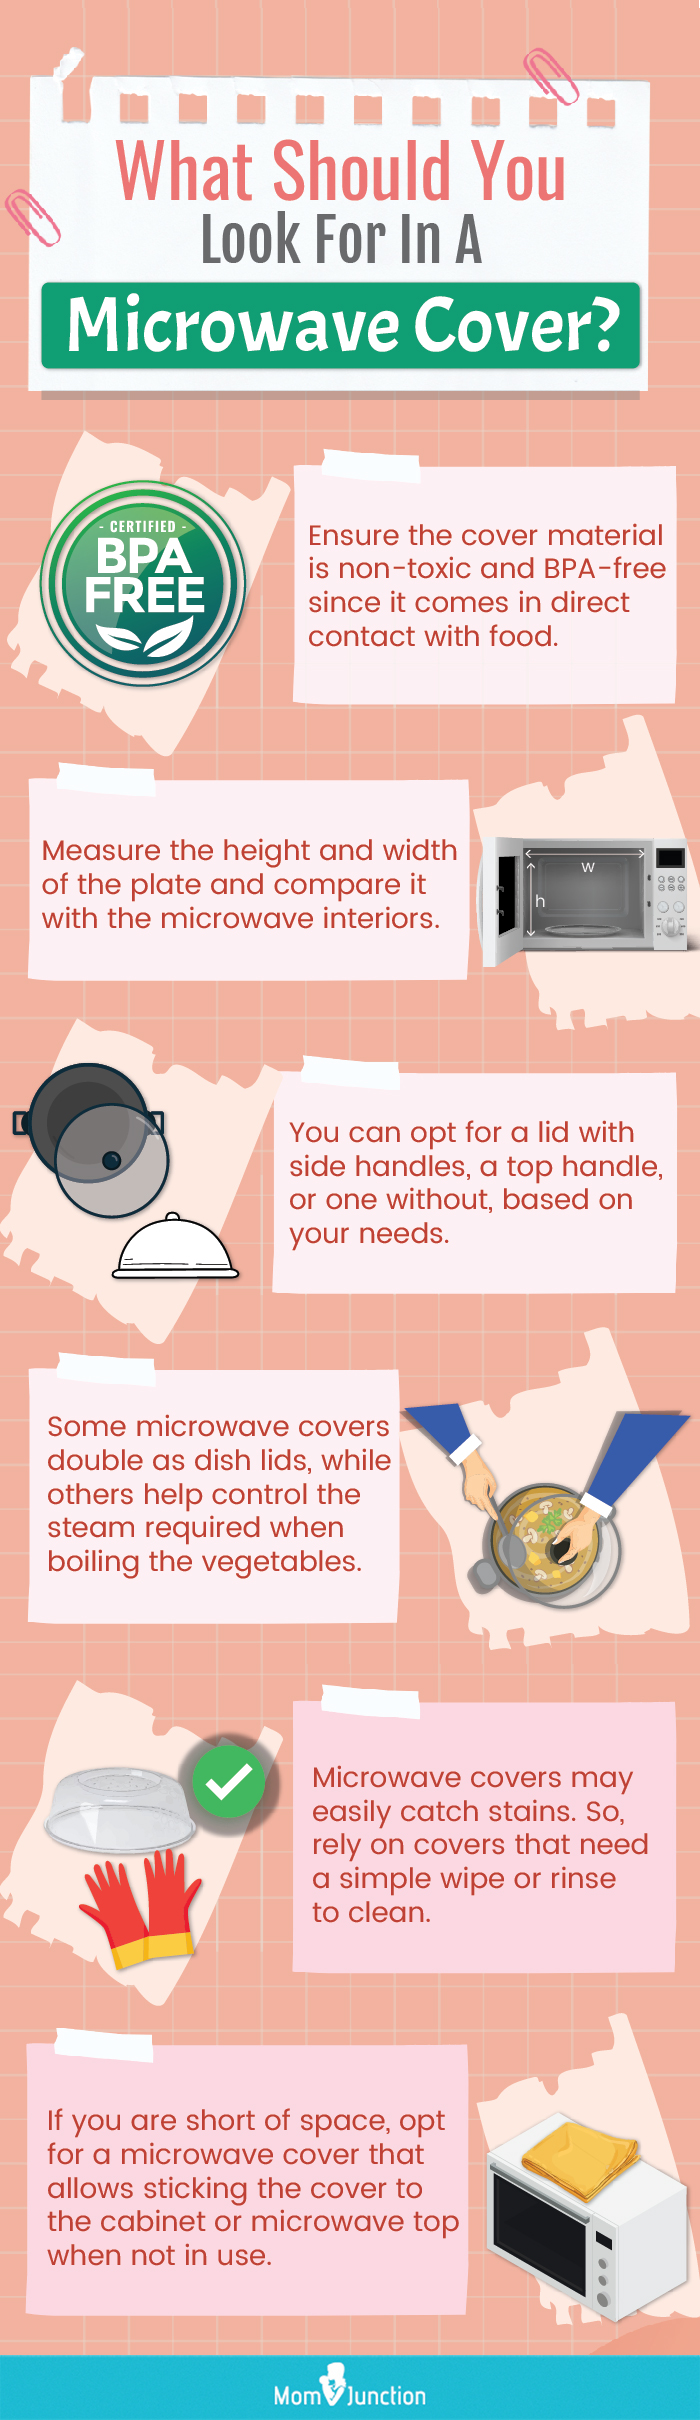 What Should You Look For In A Microwave Cover?